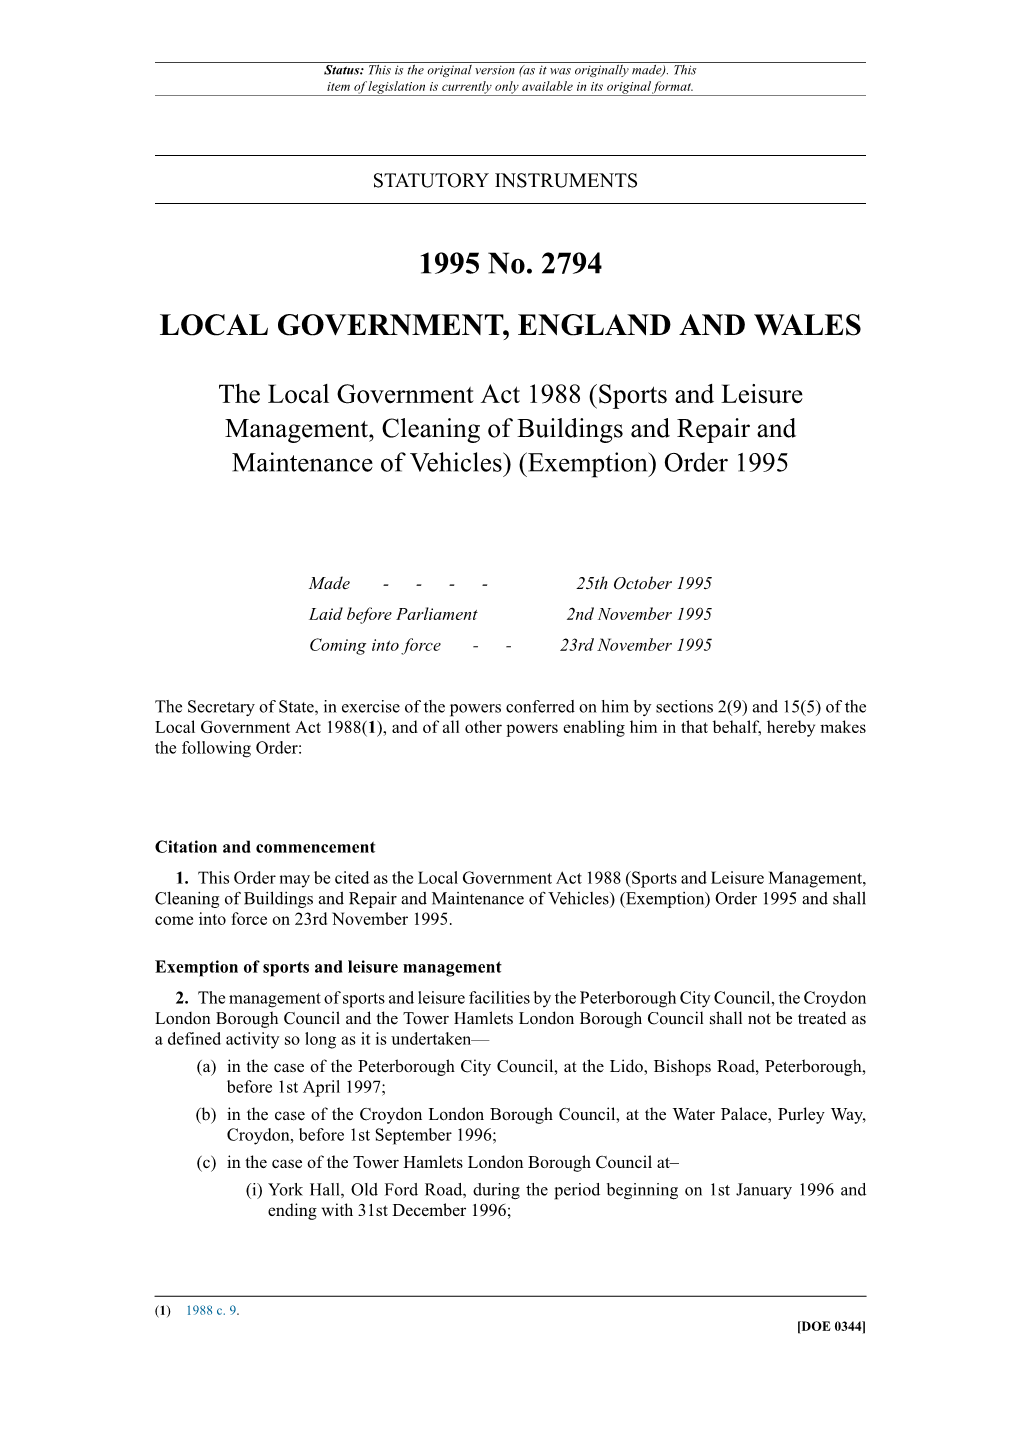 The Local Government Act 1988 (Sports and Leisure Management, Cleaning of Buildings and Repair and Maintenance of Vehicles) (Exemption) Order 1995